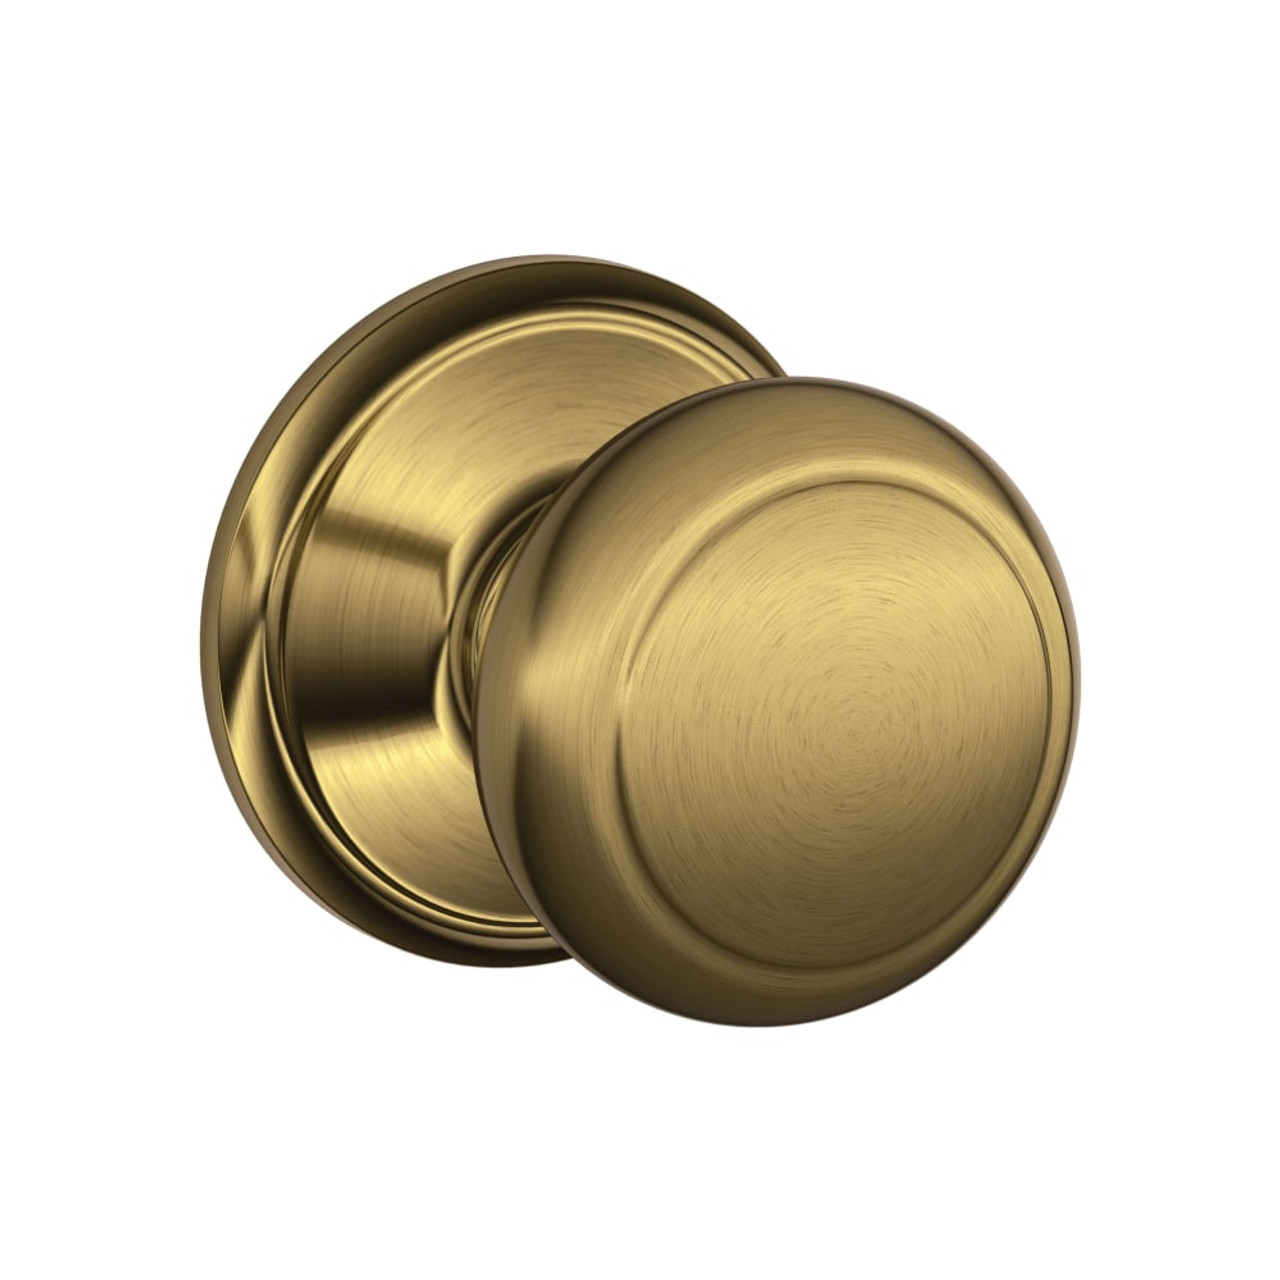 Schlage Residential F10 AND 609 Passage Latch Andover Knob Antique Brass  B and H Depot Door Hardware Shop